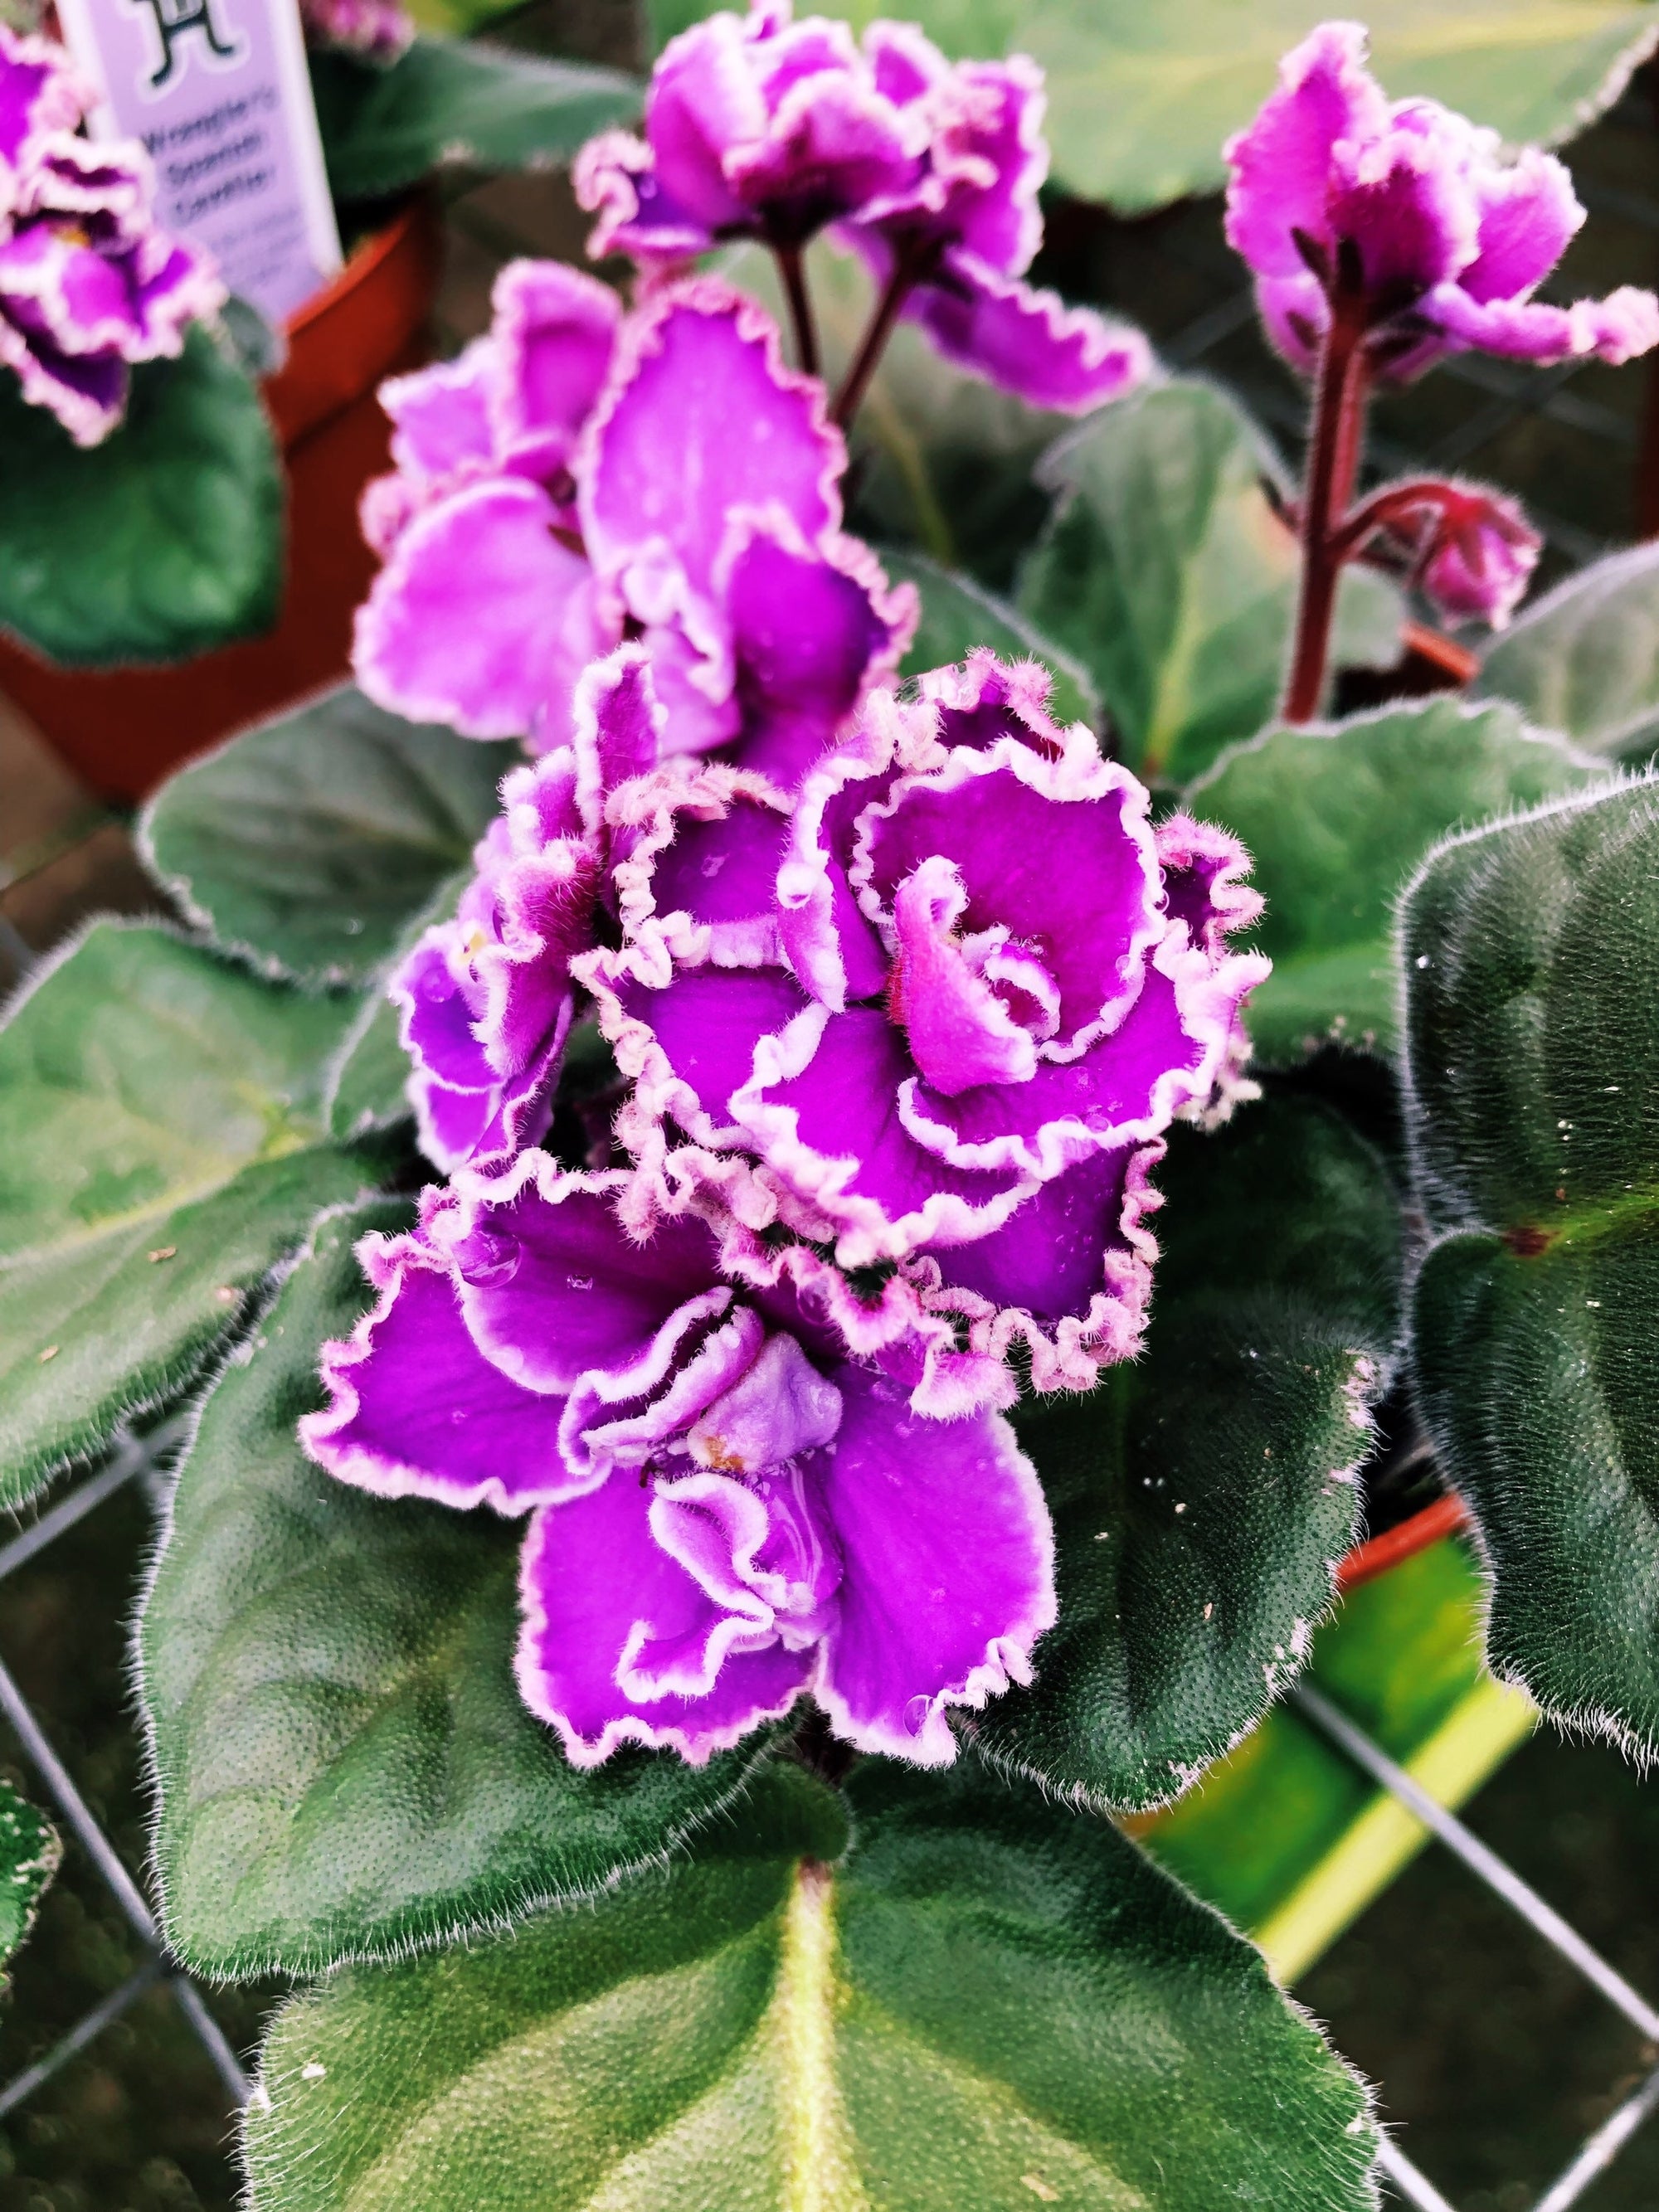 Live house plant African Violet Harmony’s ‘Wrangler’s Spanish Cavalier’ garden pink double bloom flower Potted 4” pot gift